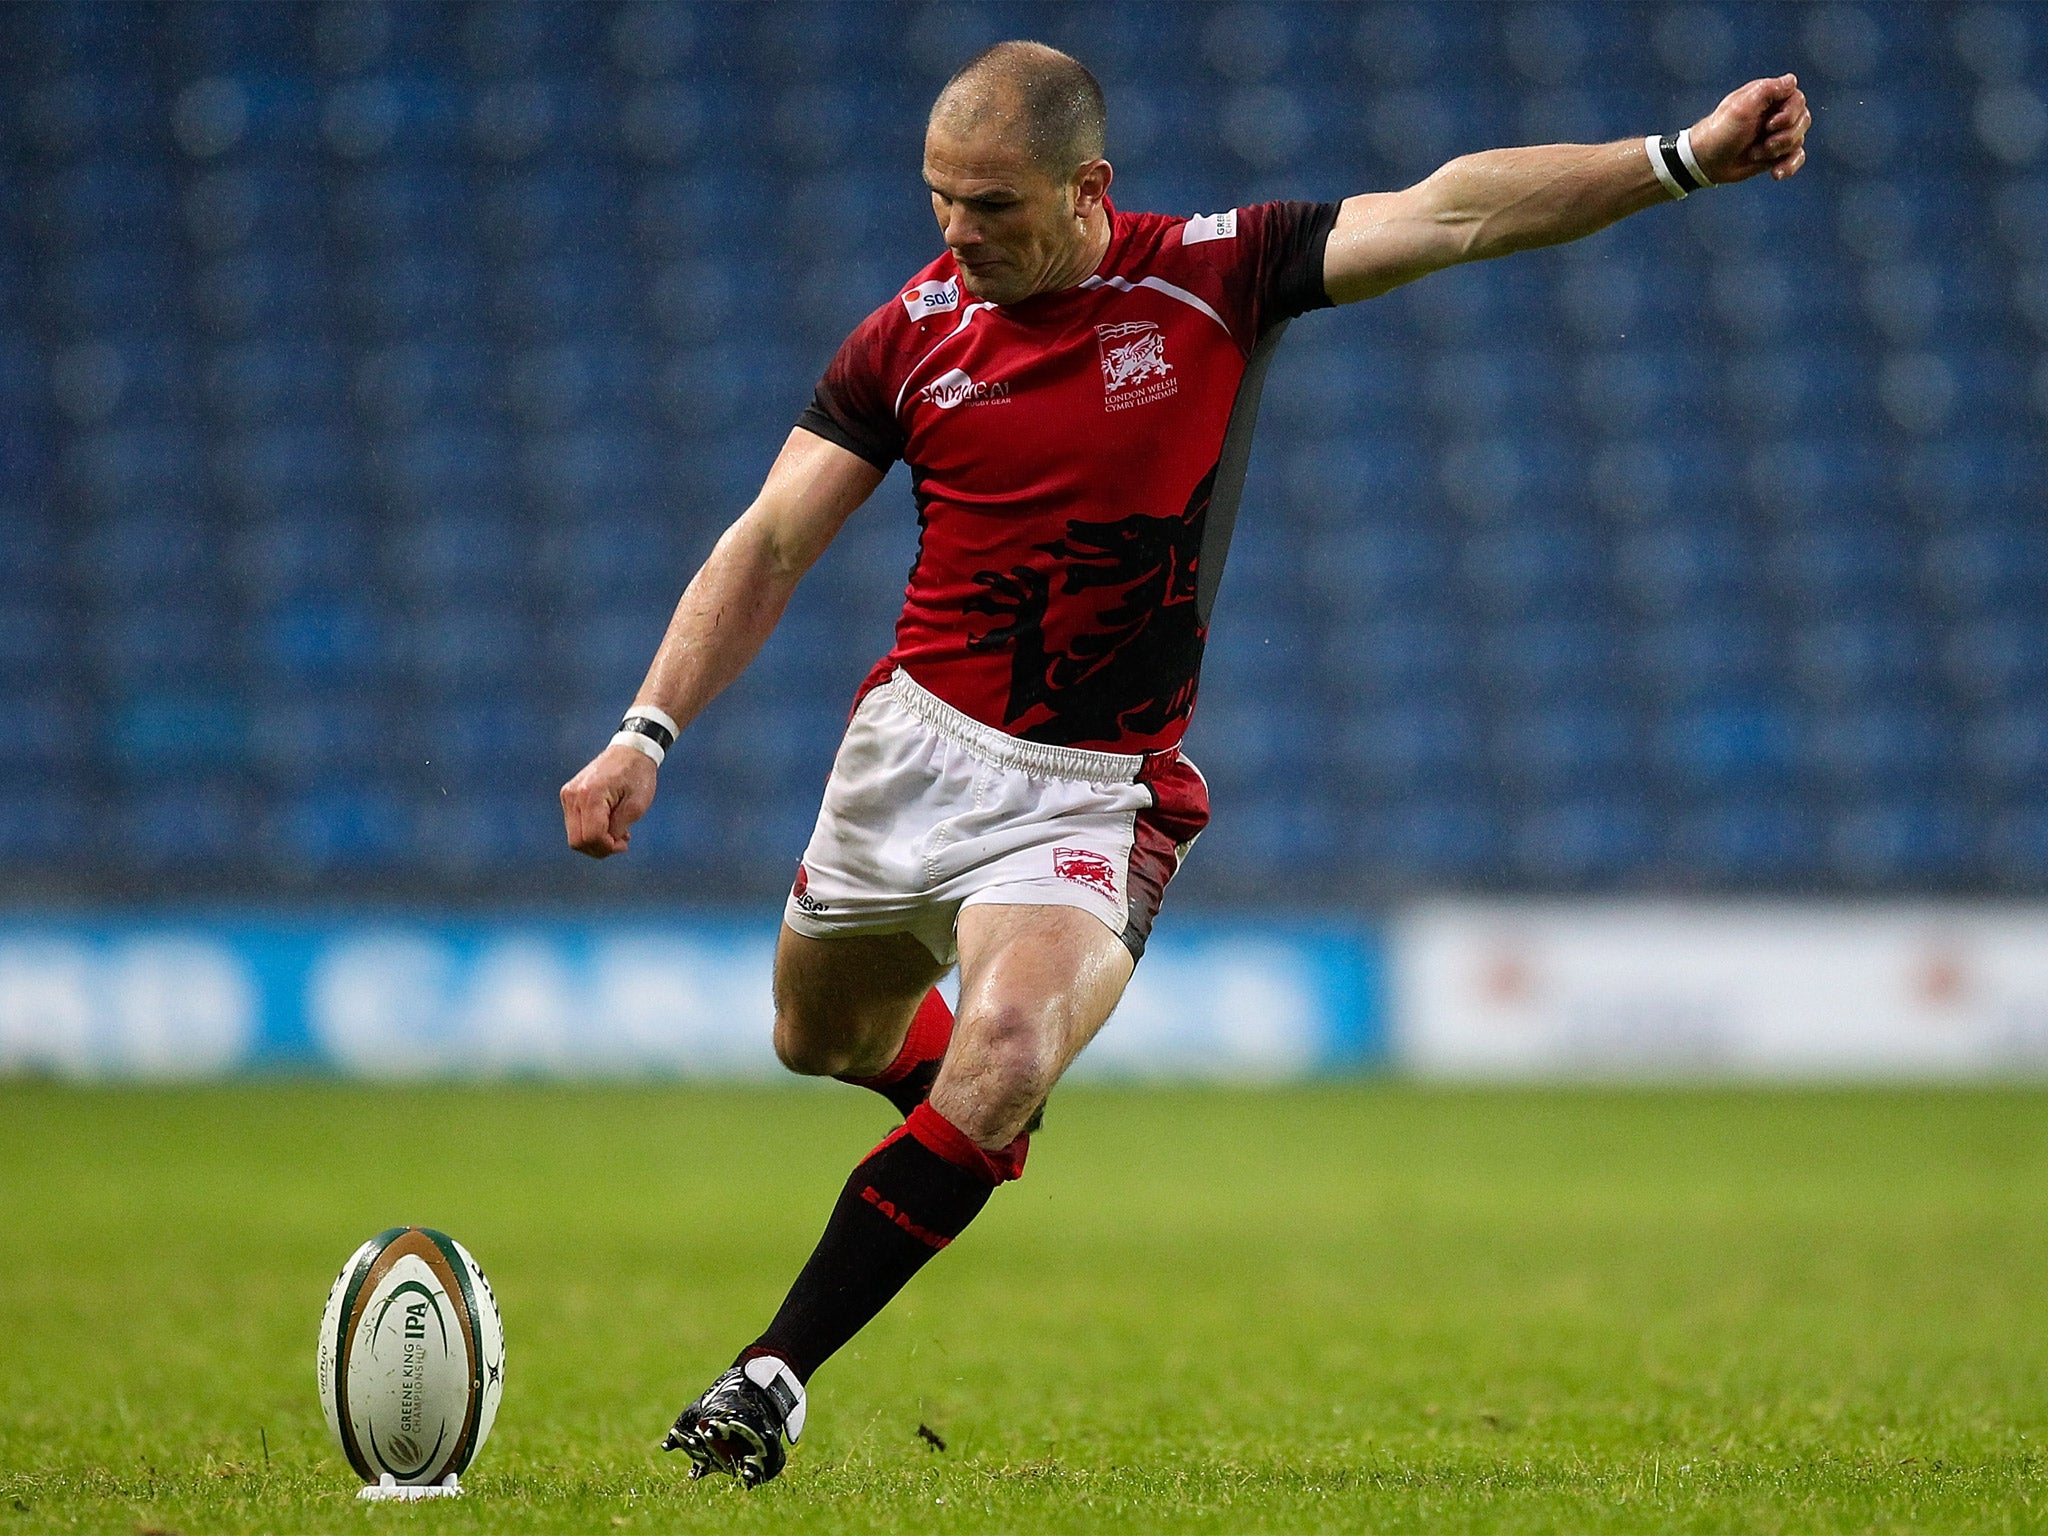 Gordon Ross converted all three tries and kicked two penalties for London Welsh